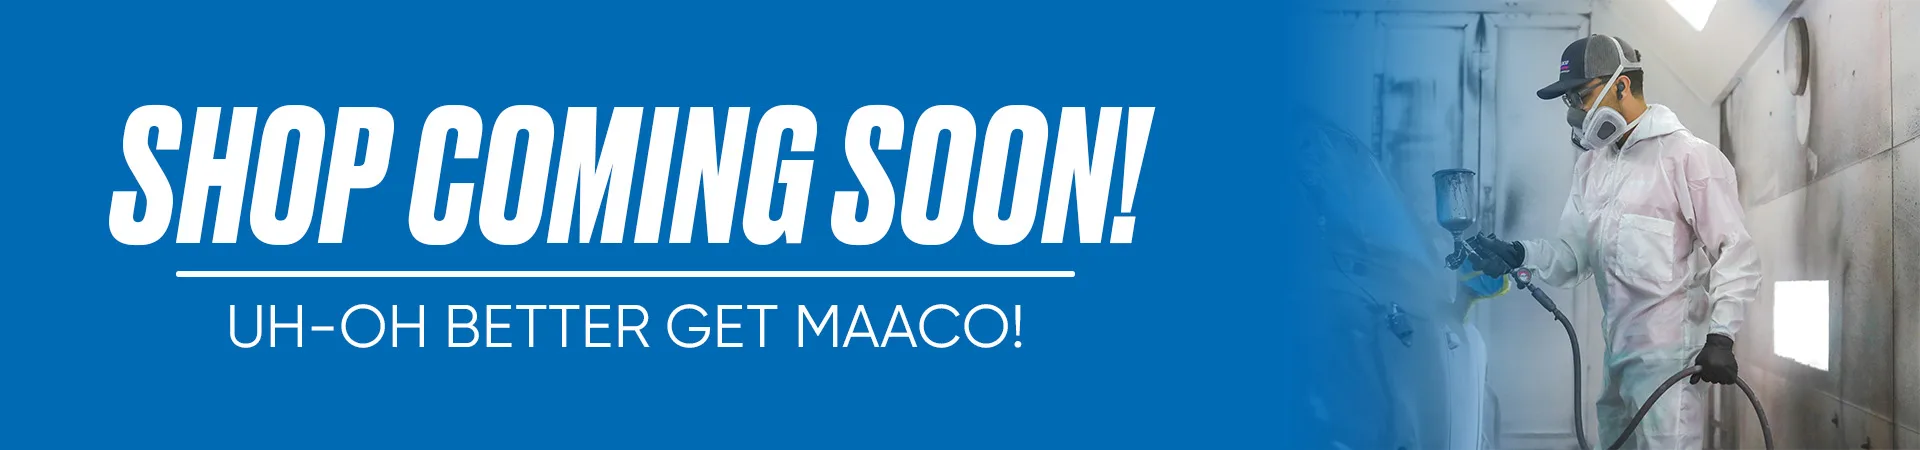 Shop coming soon! Uh-oh better get Maaco!